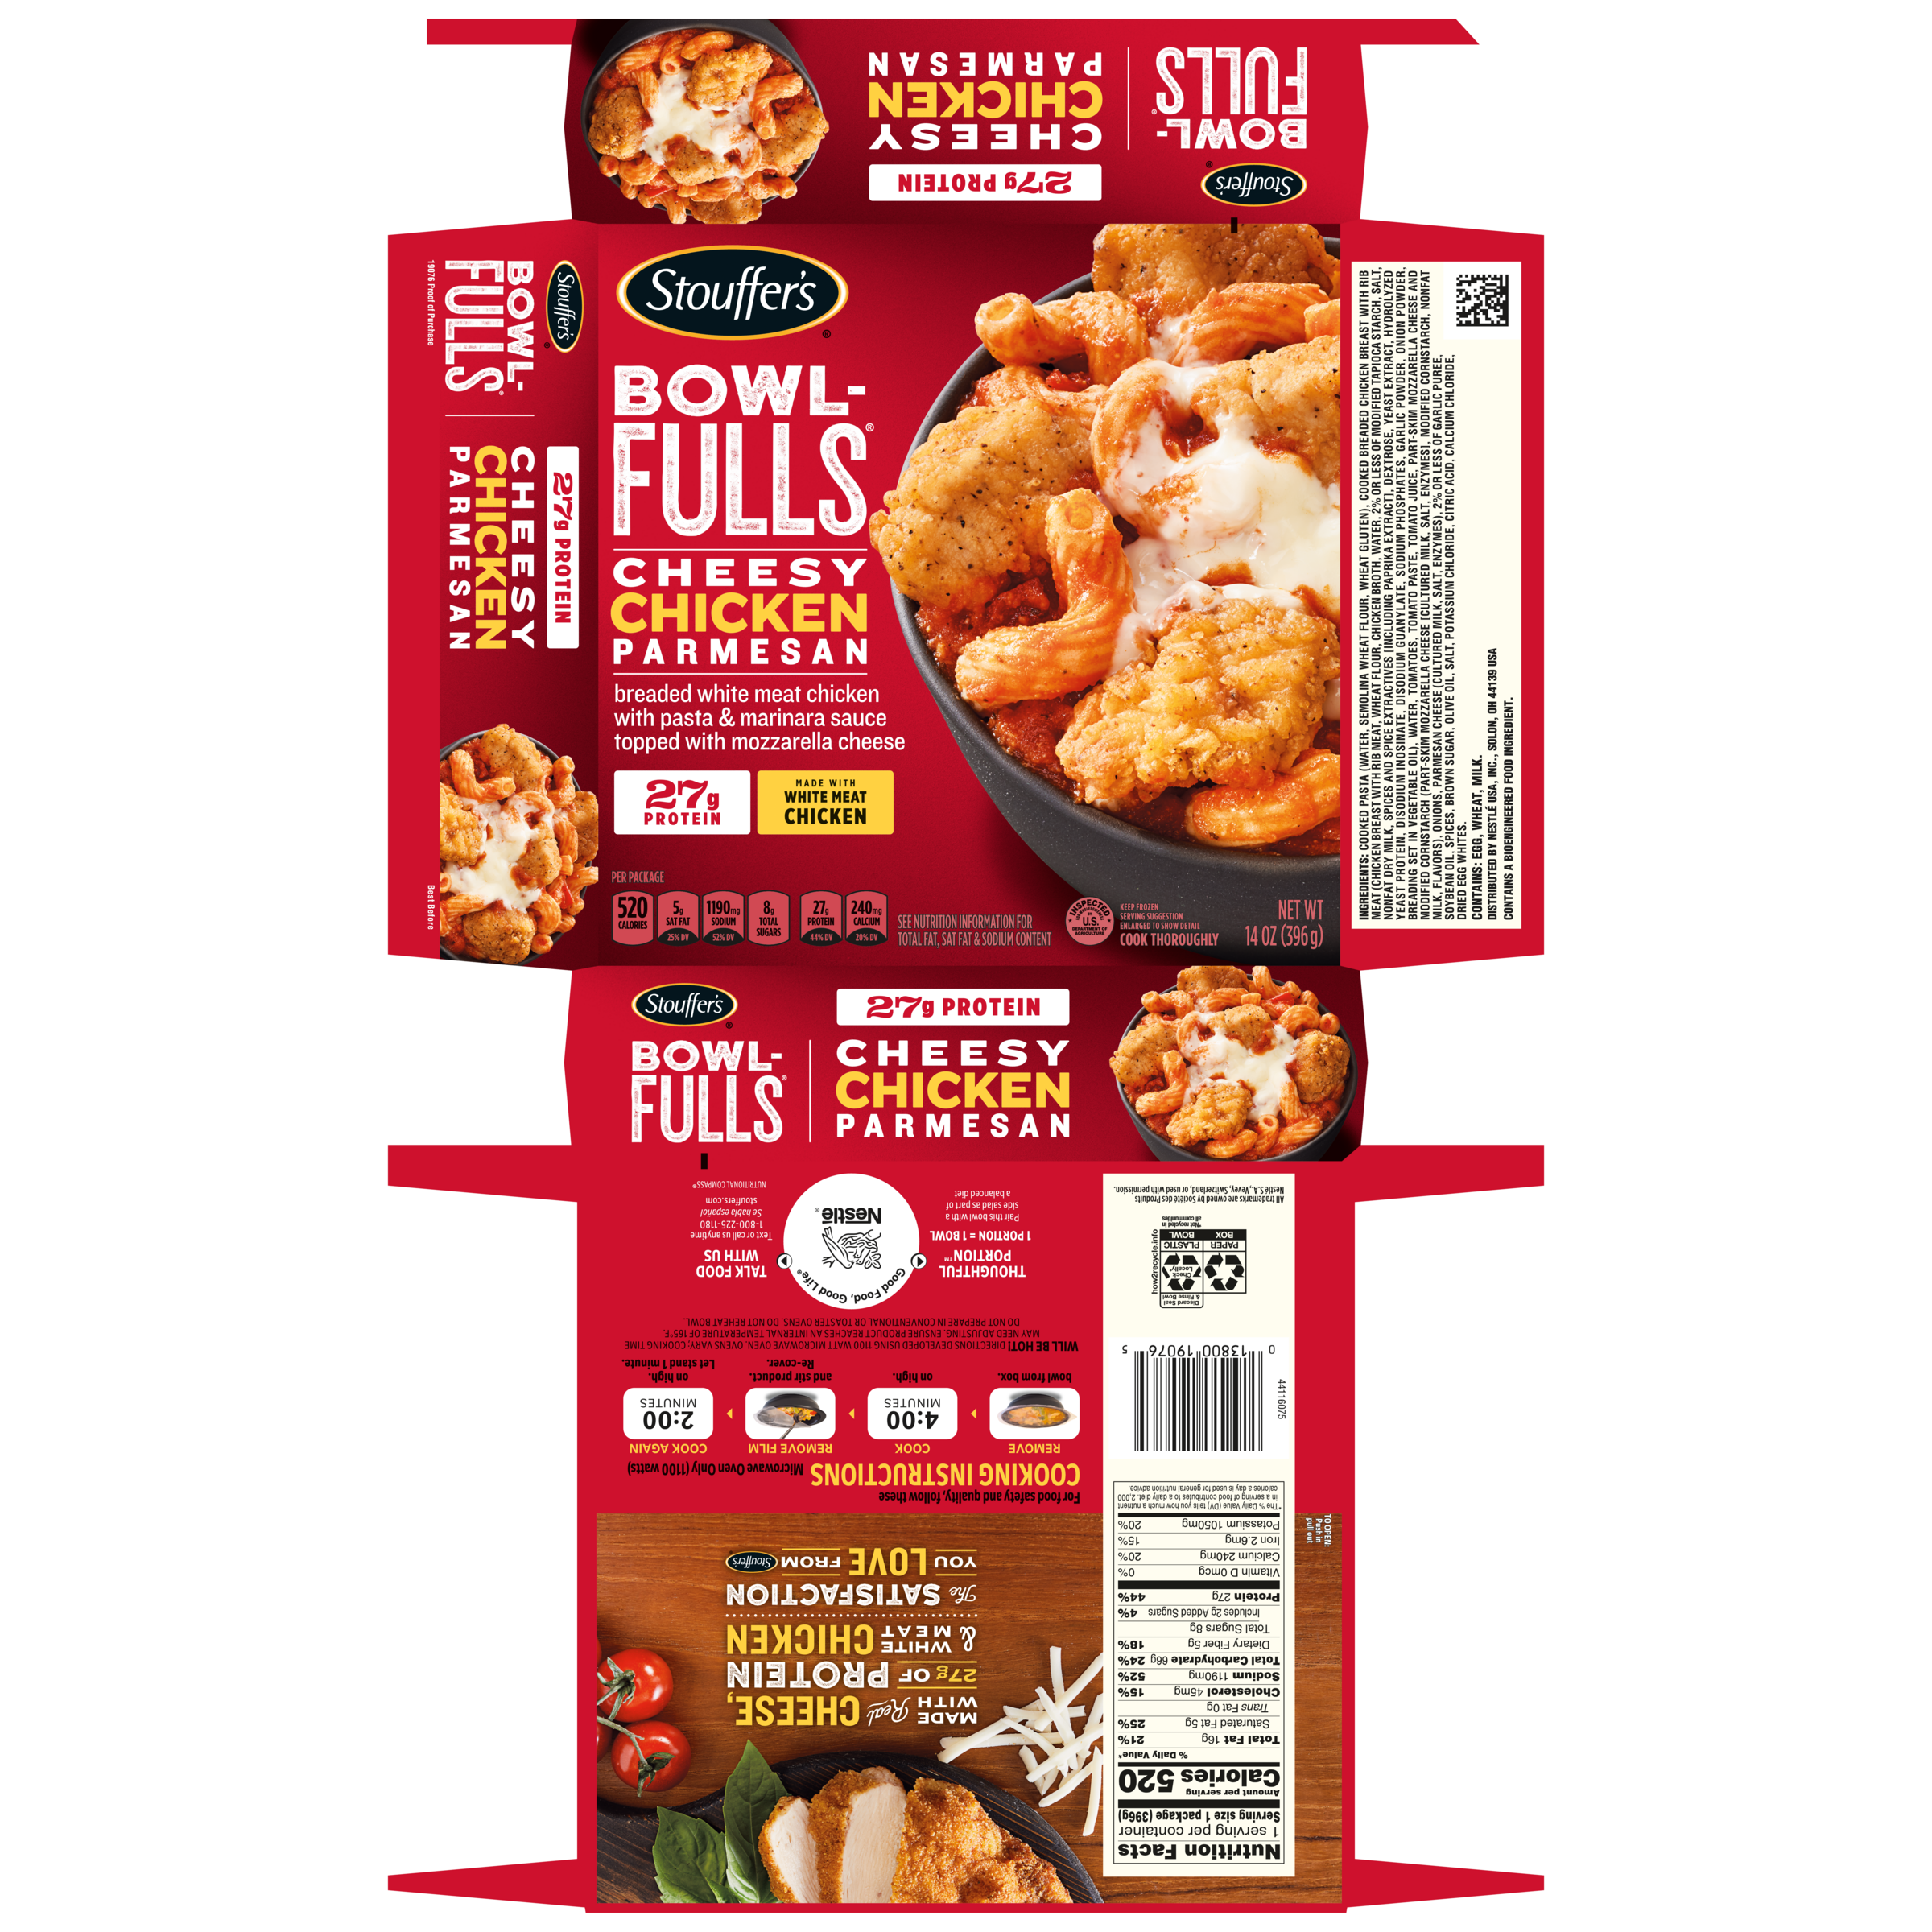 STOUFFER'S Bowl-Fulls Cheesy Chicken Parmesan 8 units per case 14.0 oz Product Label